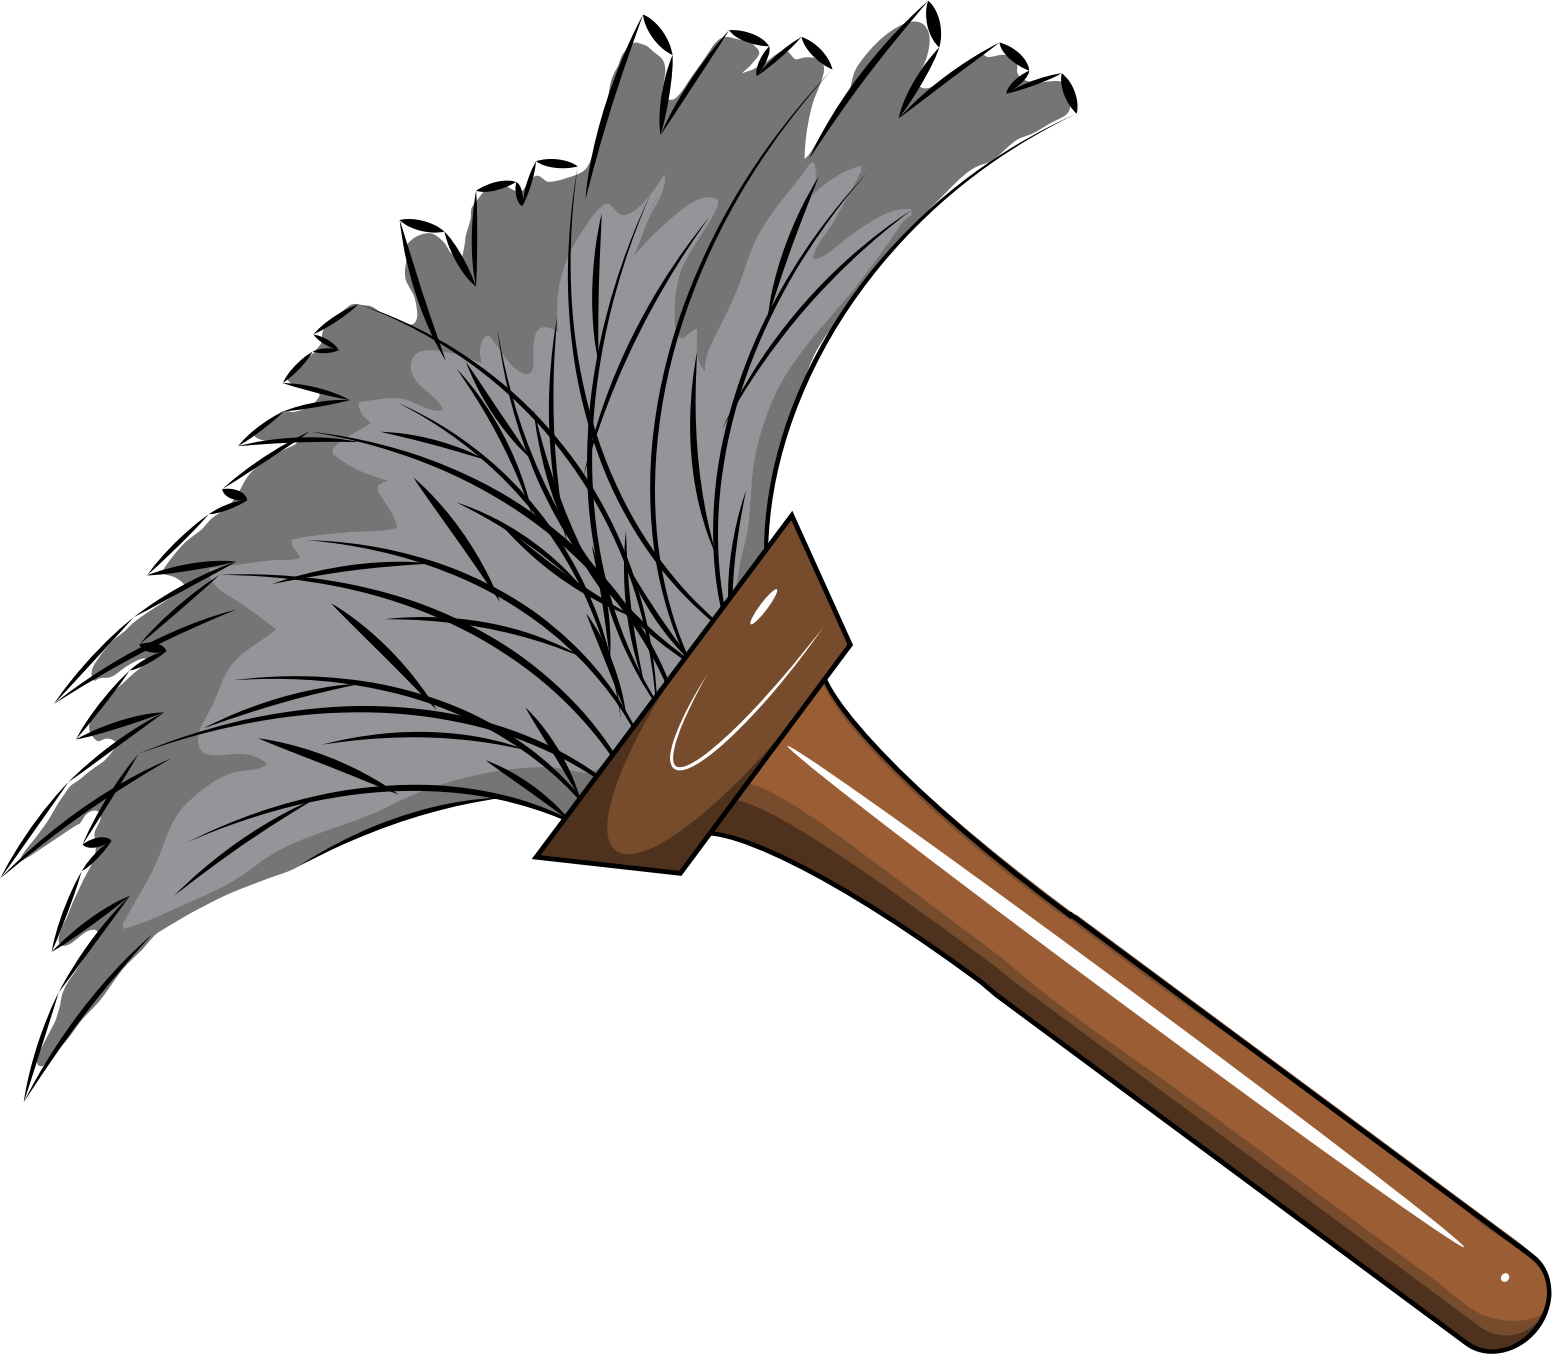 Feather duster big image. Dust clipart care